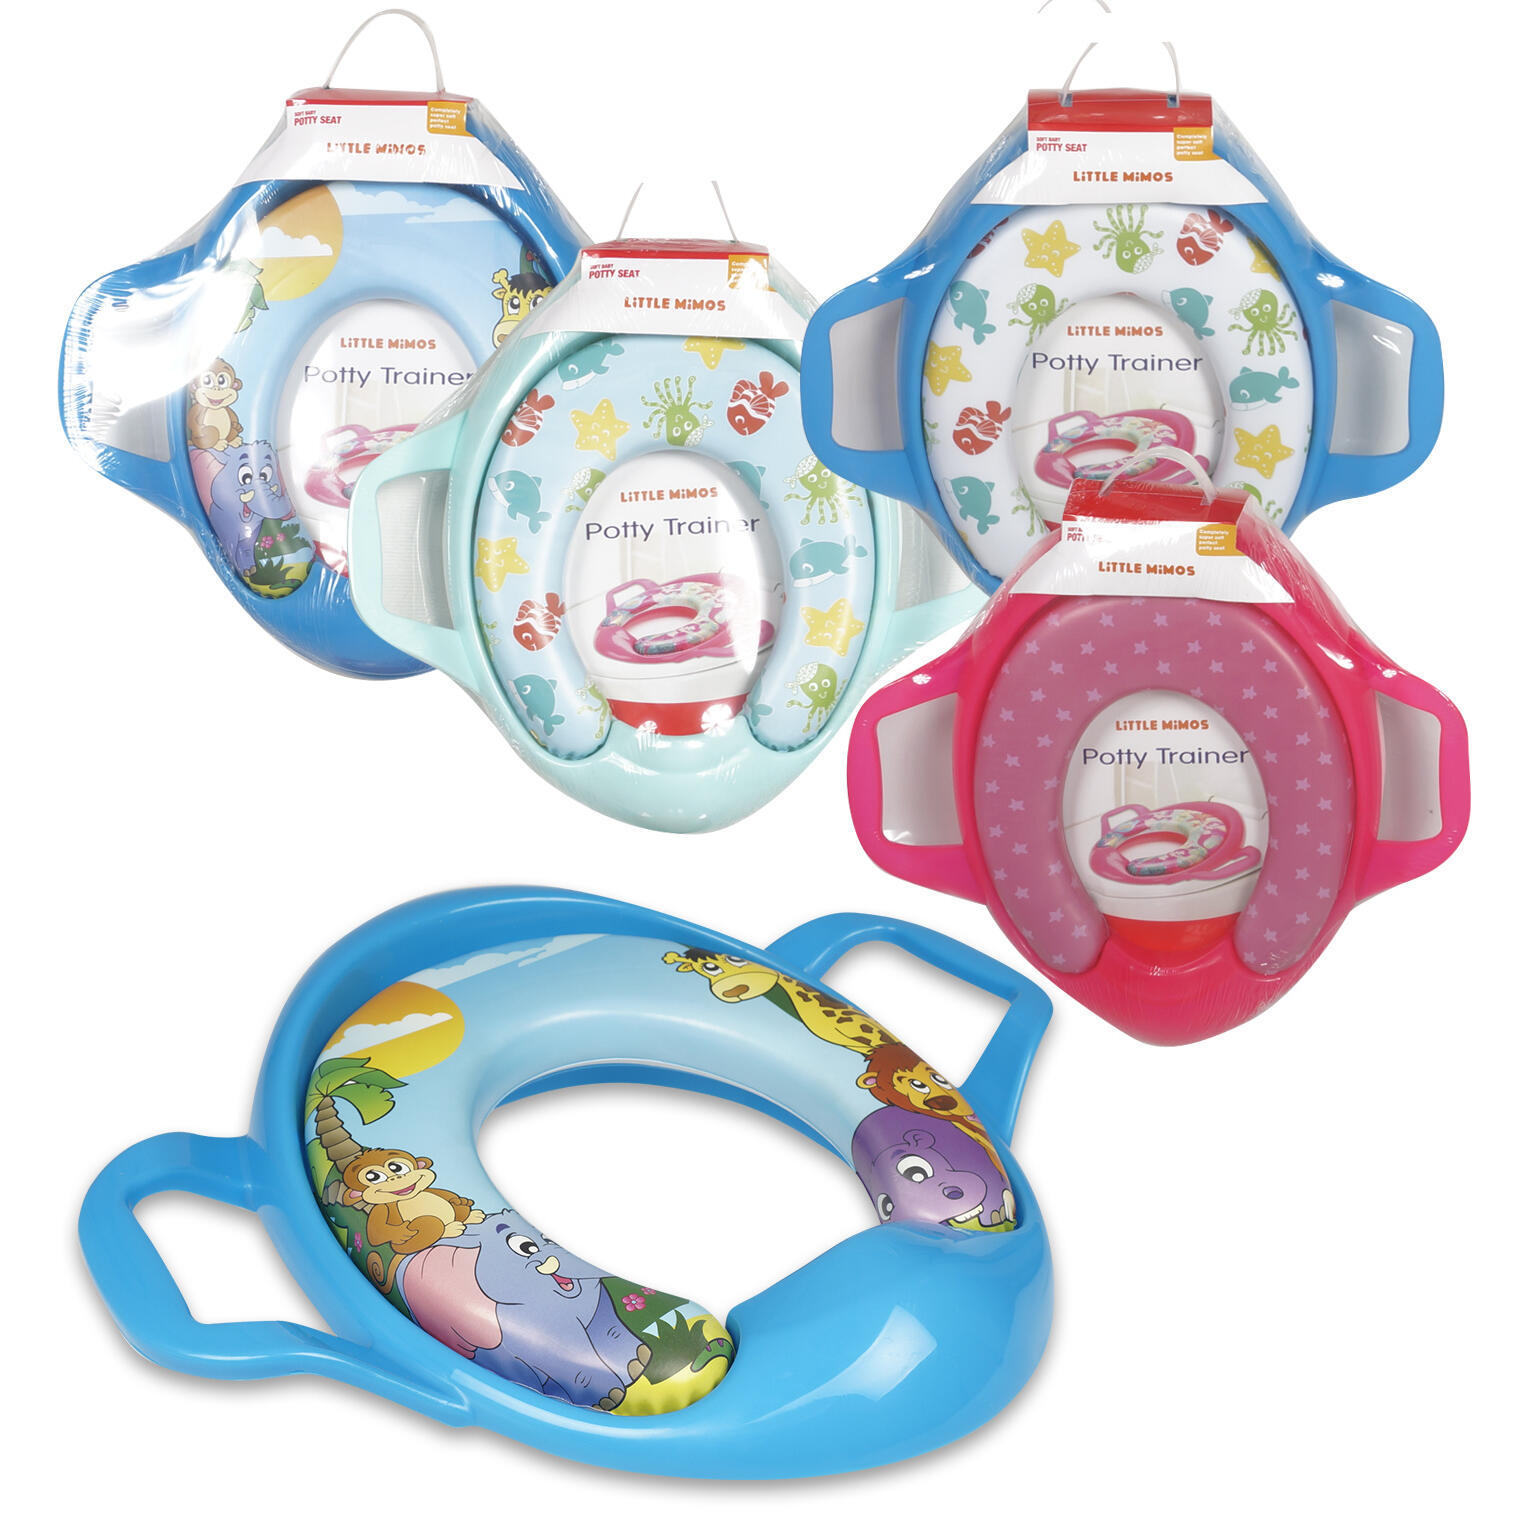 Wholesale Little Mimos Soft Baby Toilet Seat with Handles - Assorted